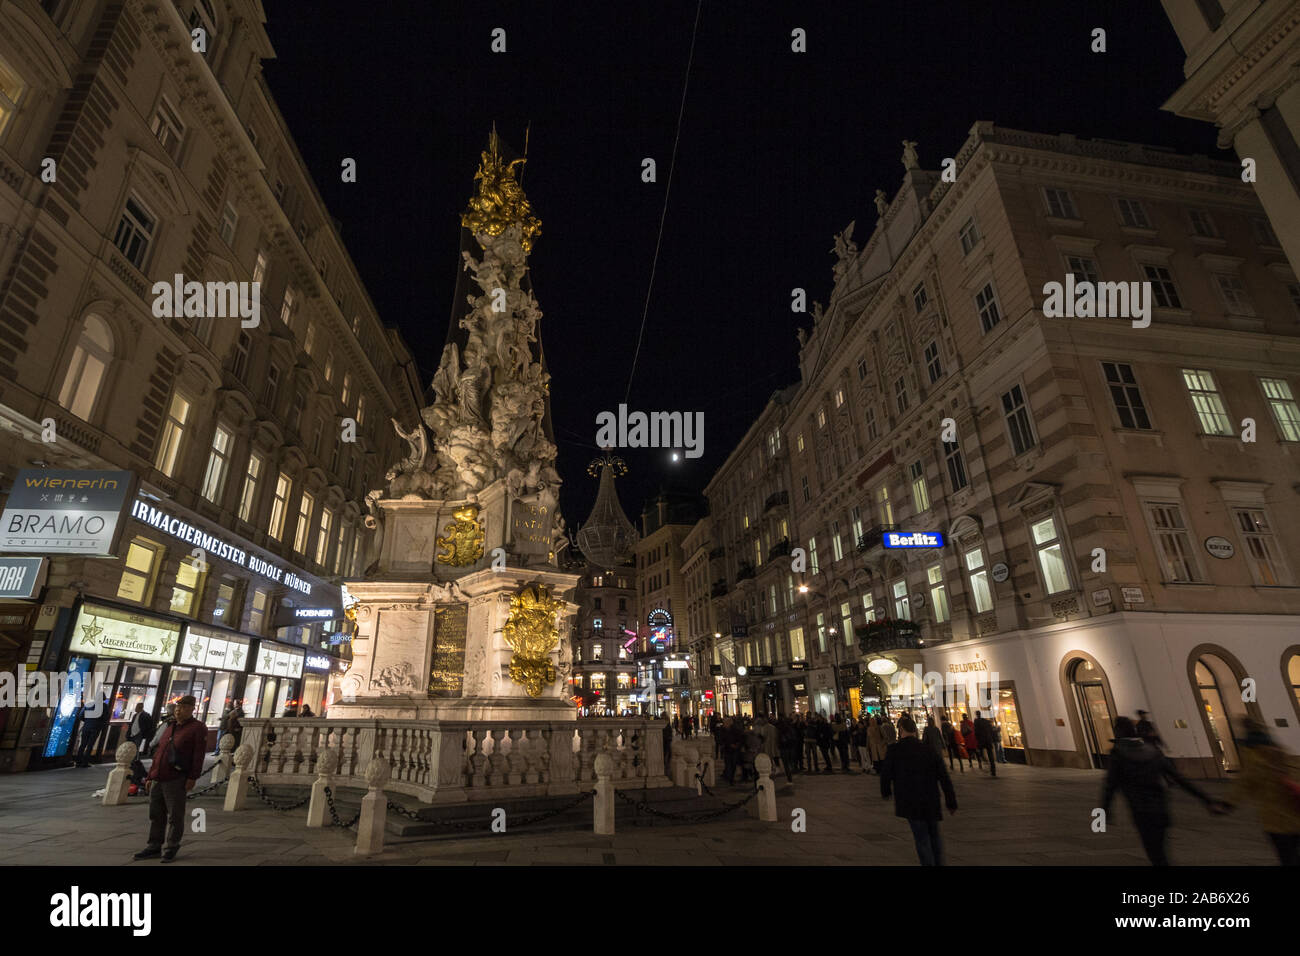 VIENNA, AUSTRIA - NOVEMBER 6, 2019: Wiener Pestsaule, also called the Plague Column, on Graben street, at nights, with pedestrians passing by. It is a Stock Photo